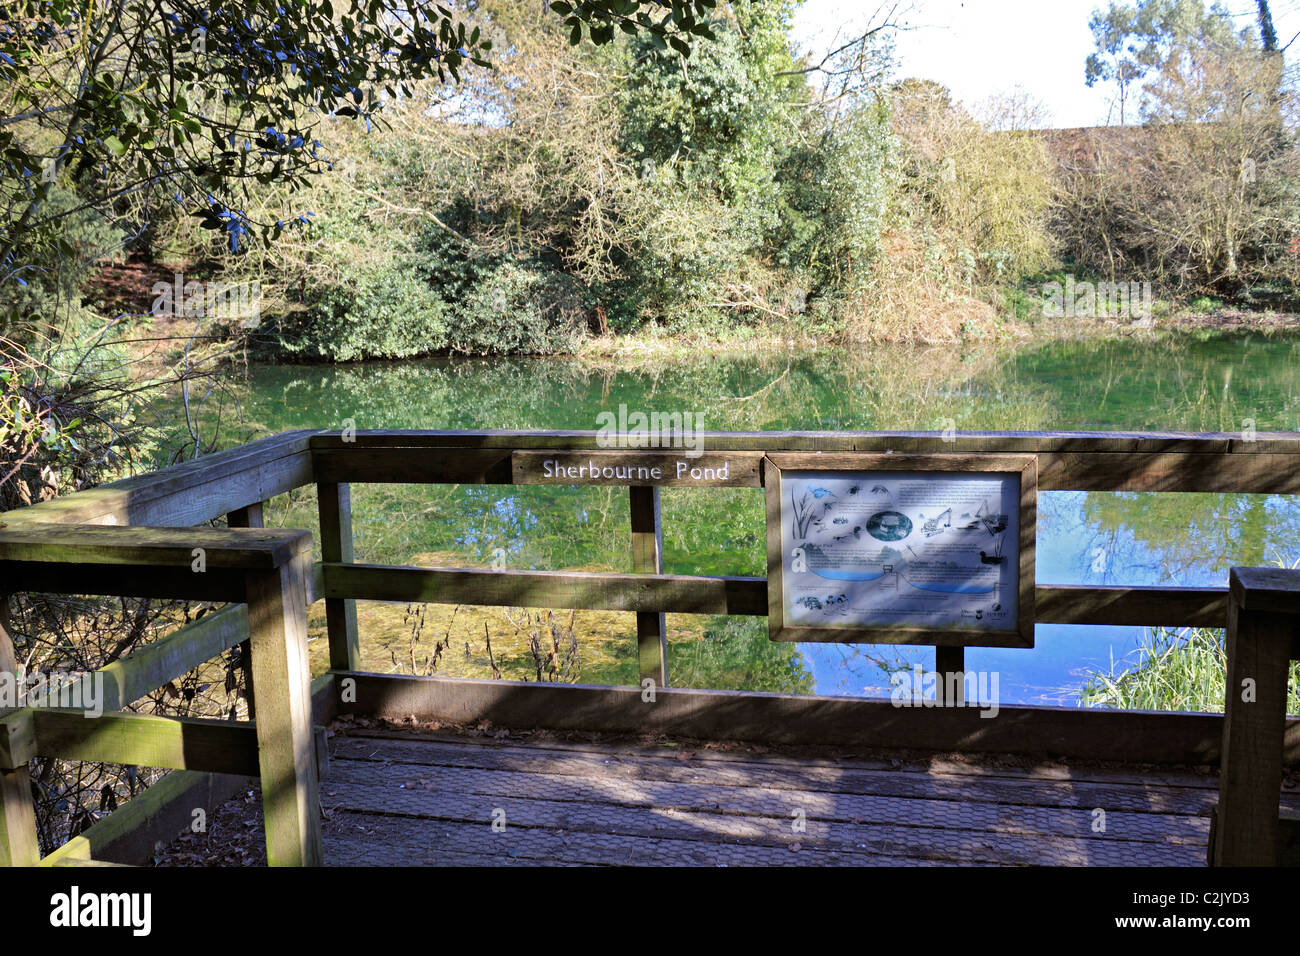 Sherbourne Pond near The Silent Pool on the A25 Shere Road between Guildford and Dorking, Surrey England UK. Stock Photo